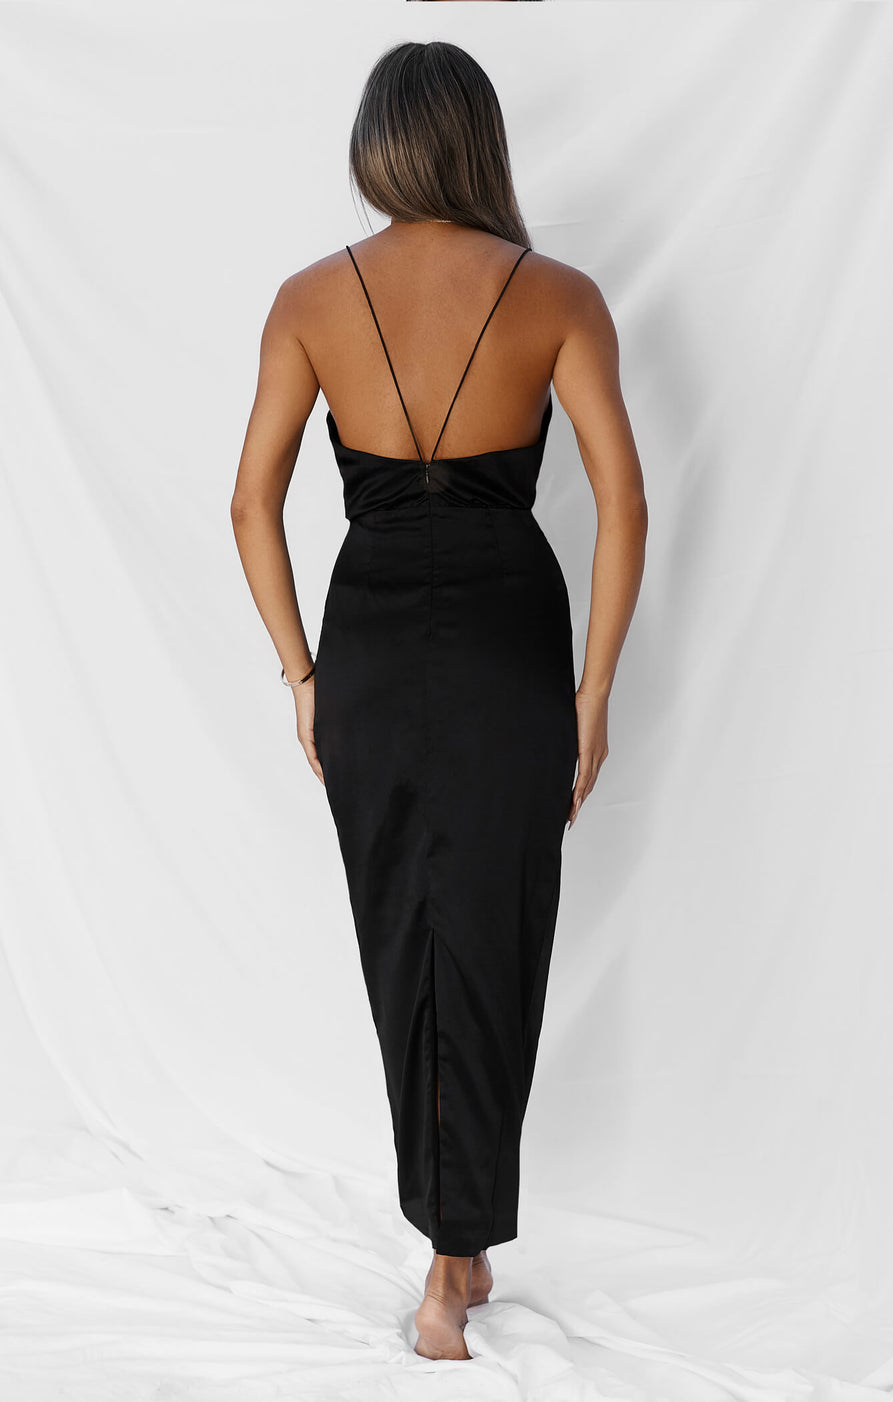 THE SILK CLASSIC DRESS - BLACK – All Things Golden